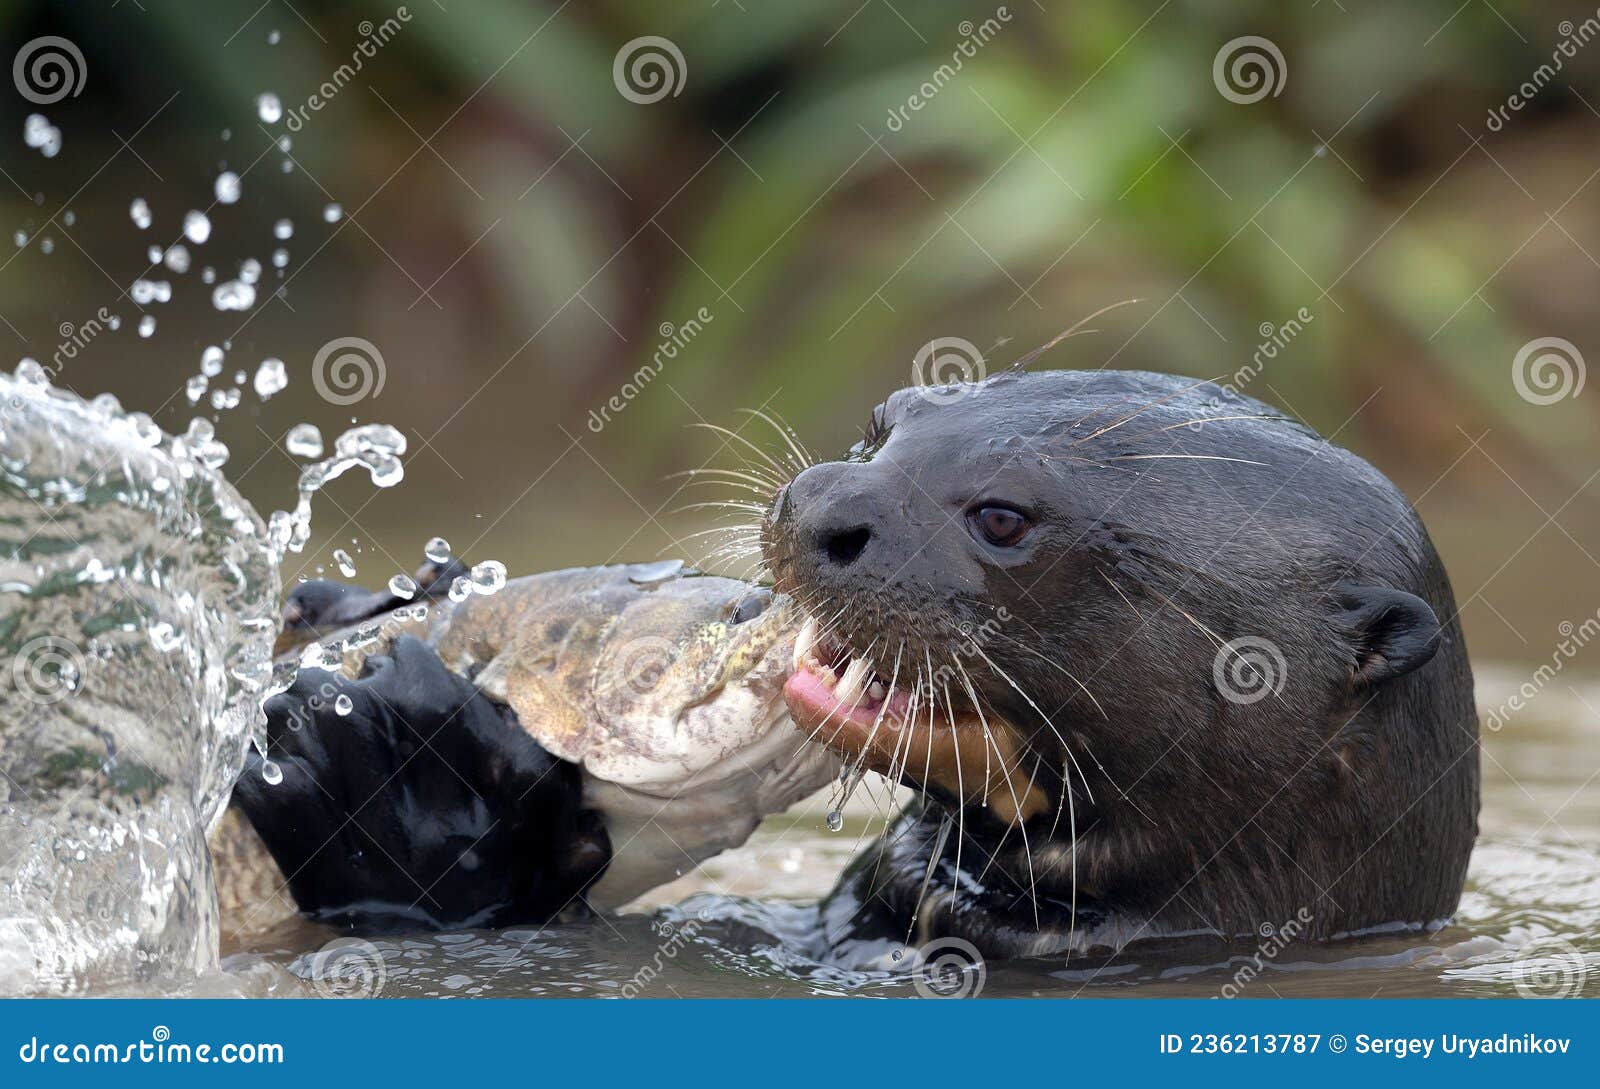 giant otter eating fish in the water. giant river otter, pteronura brasiliensis.